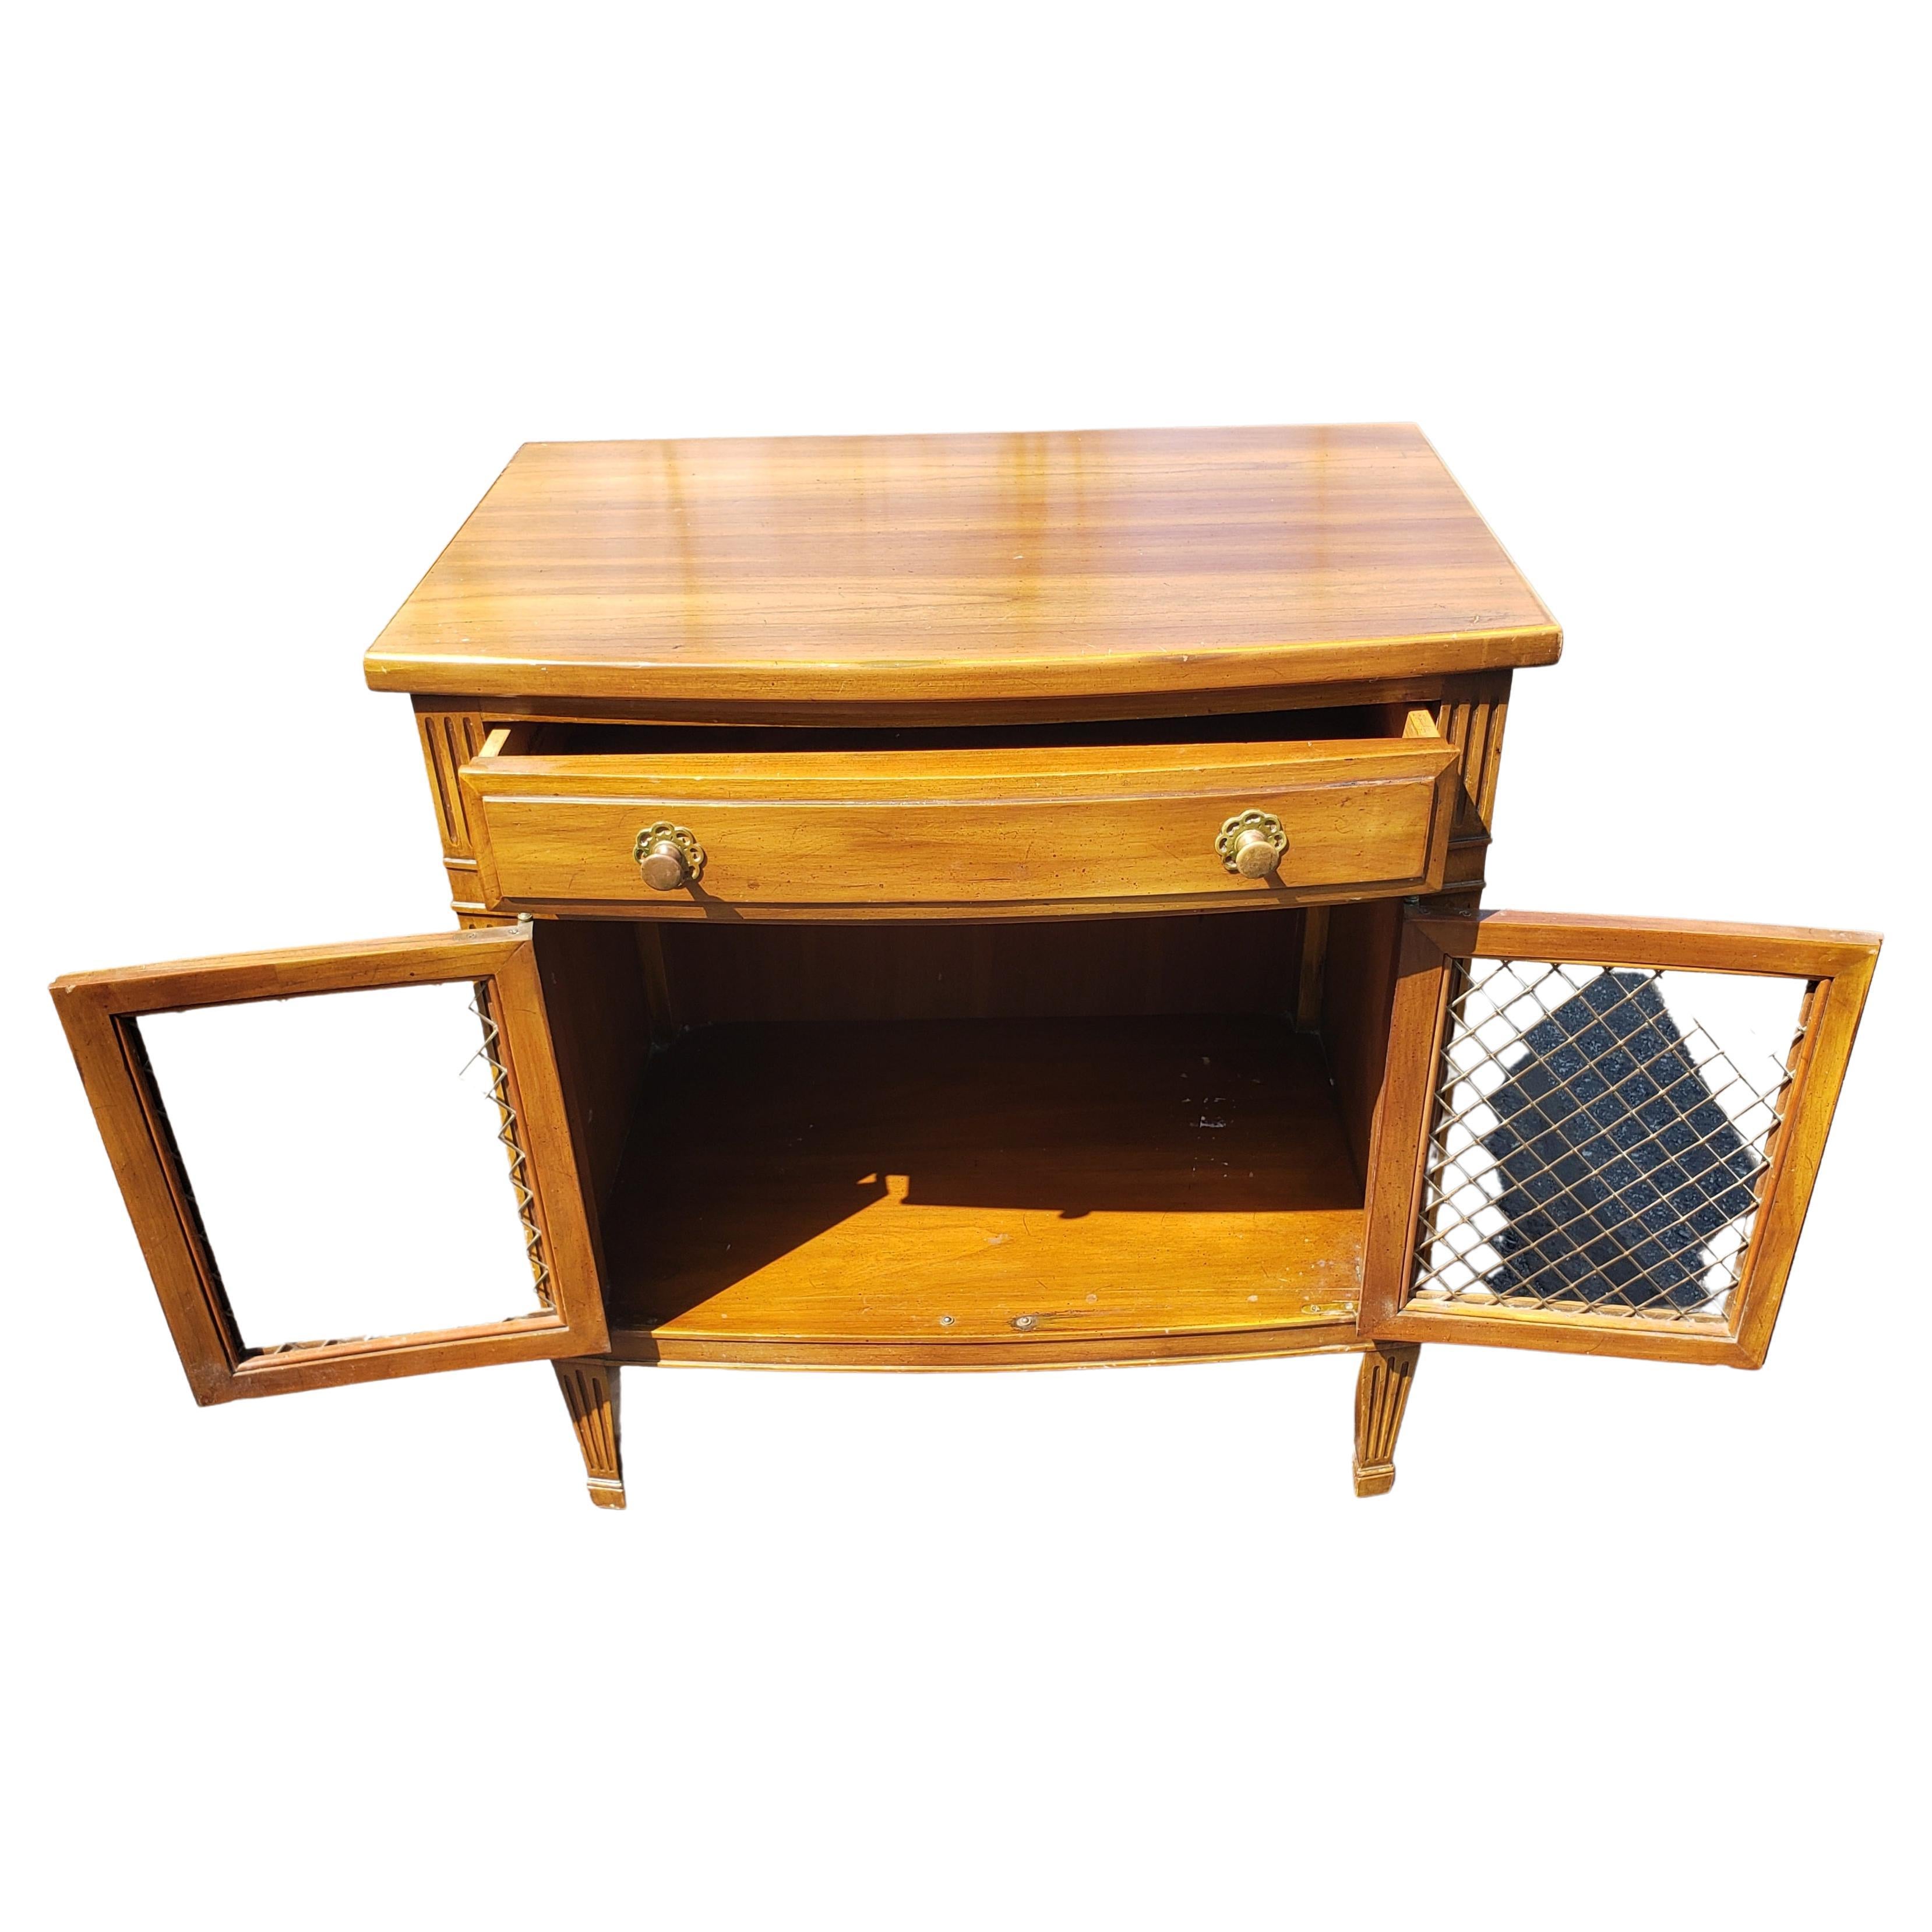 Varnished John Widdicomb French Country Side Tables Nightstands, Circa 1950s